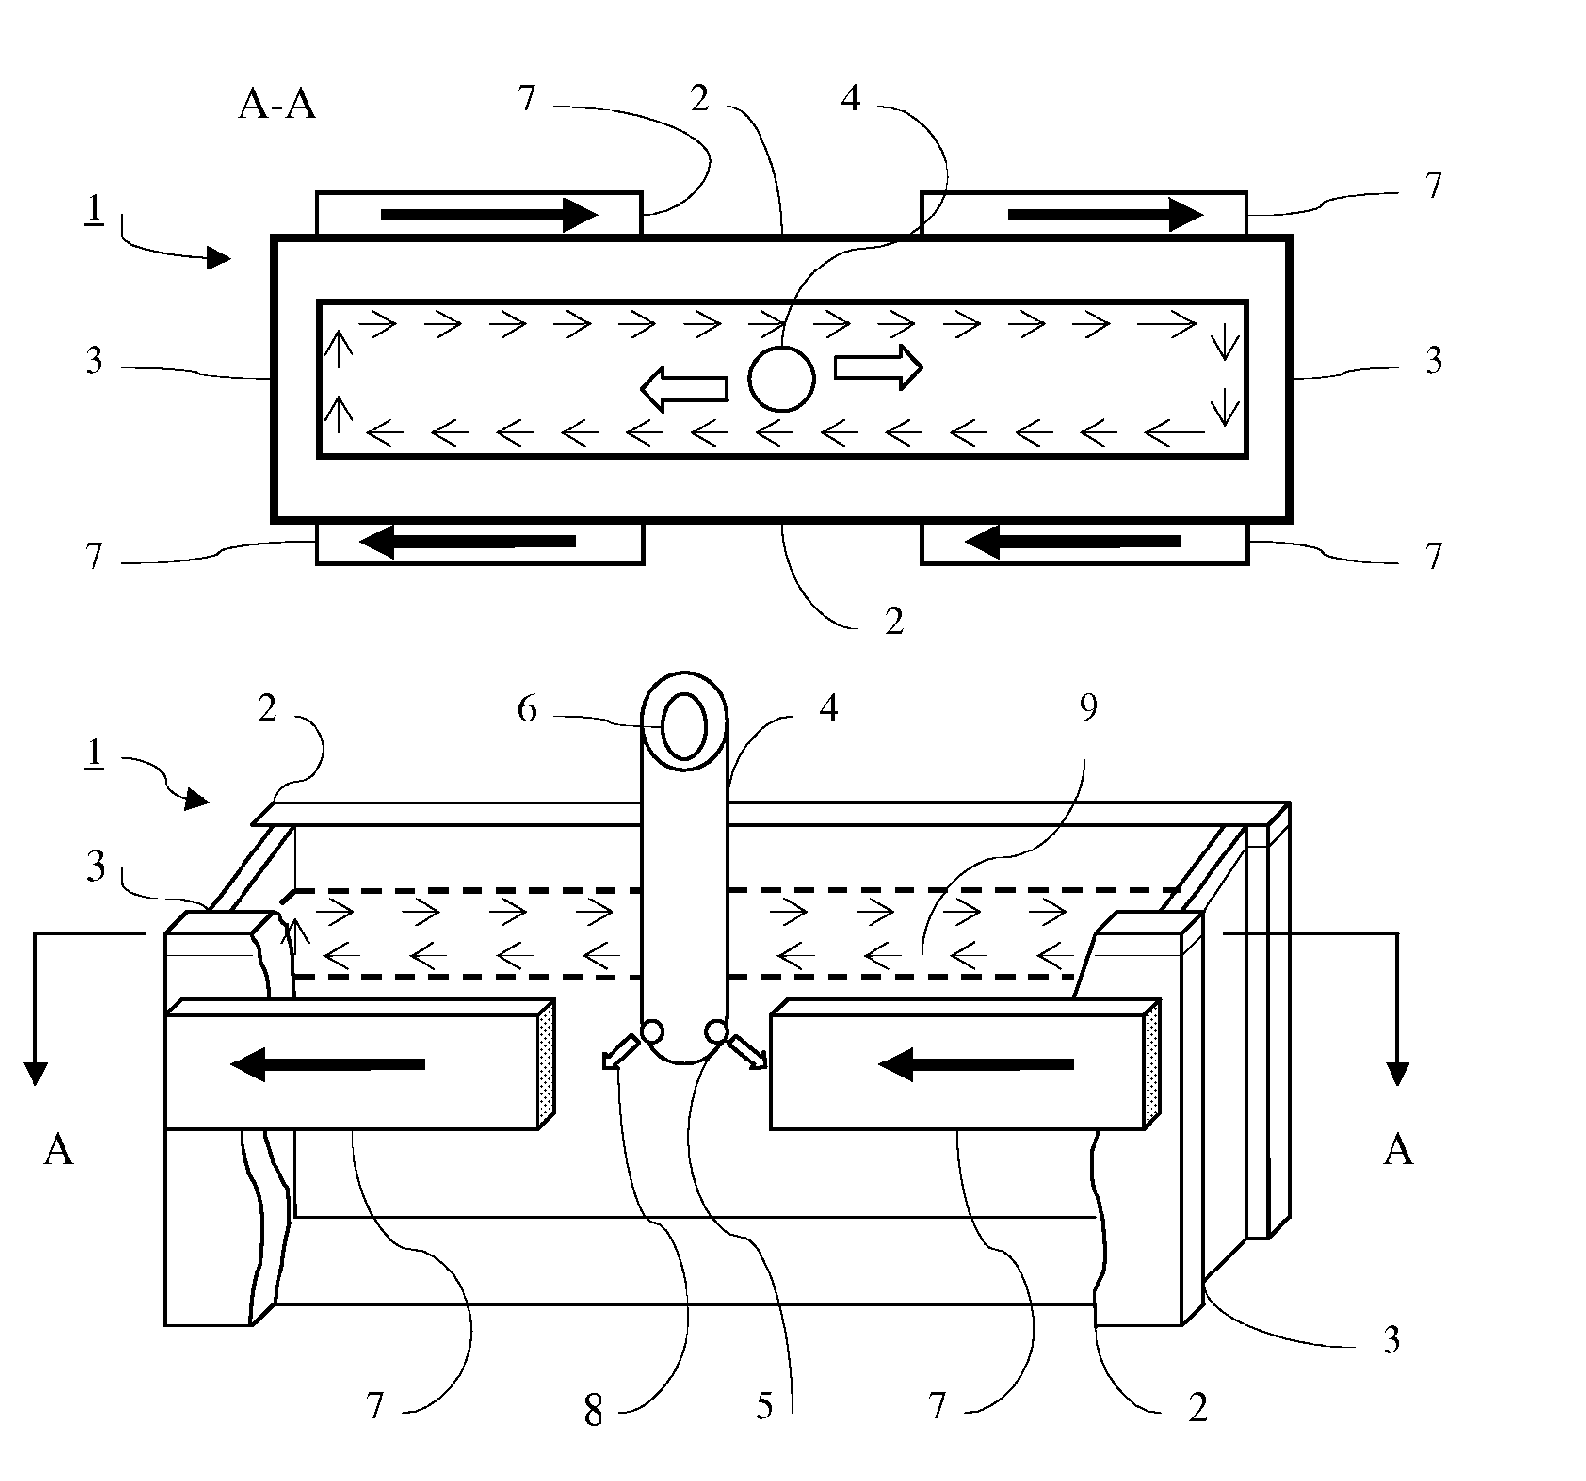 Method And Apparatus For Controlling The Flow Of Molten Steel In A Mould